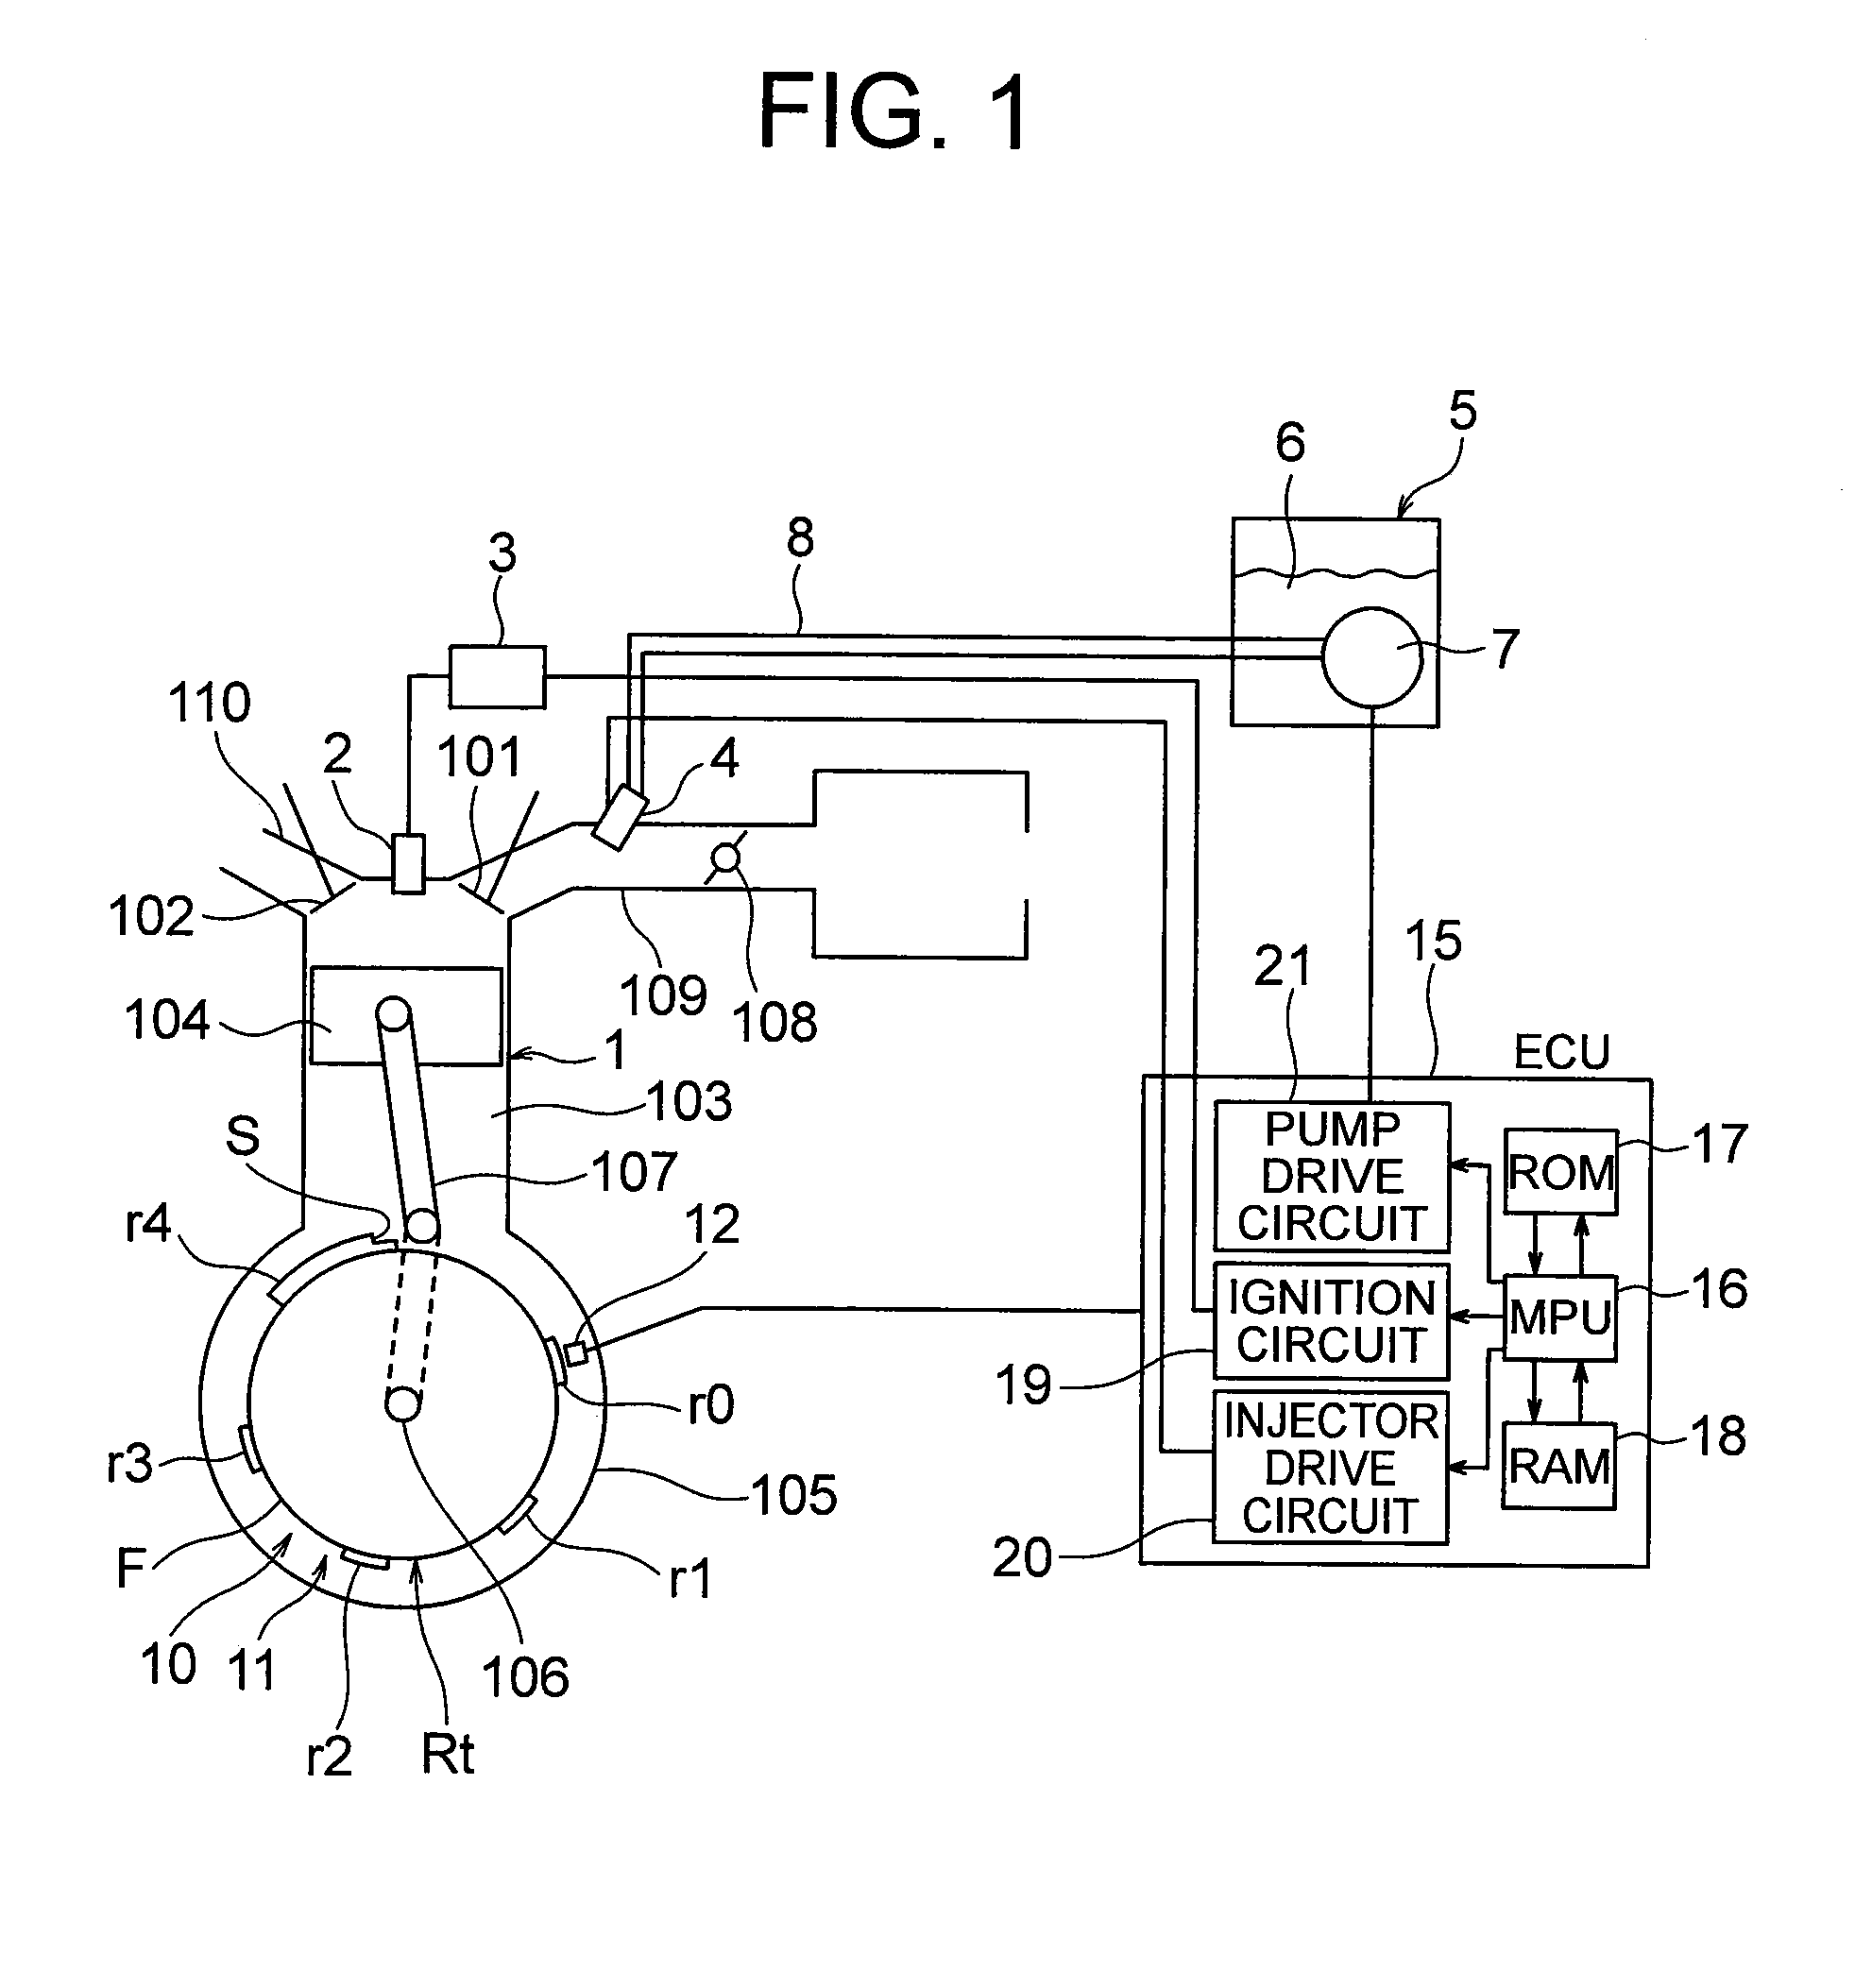 Engine ignition control device